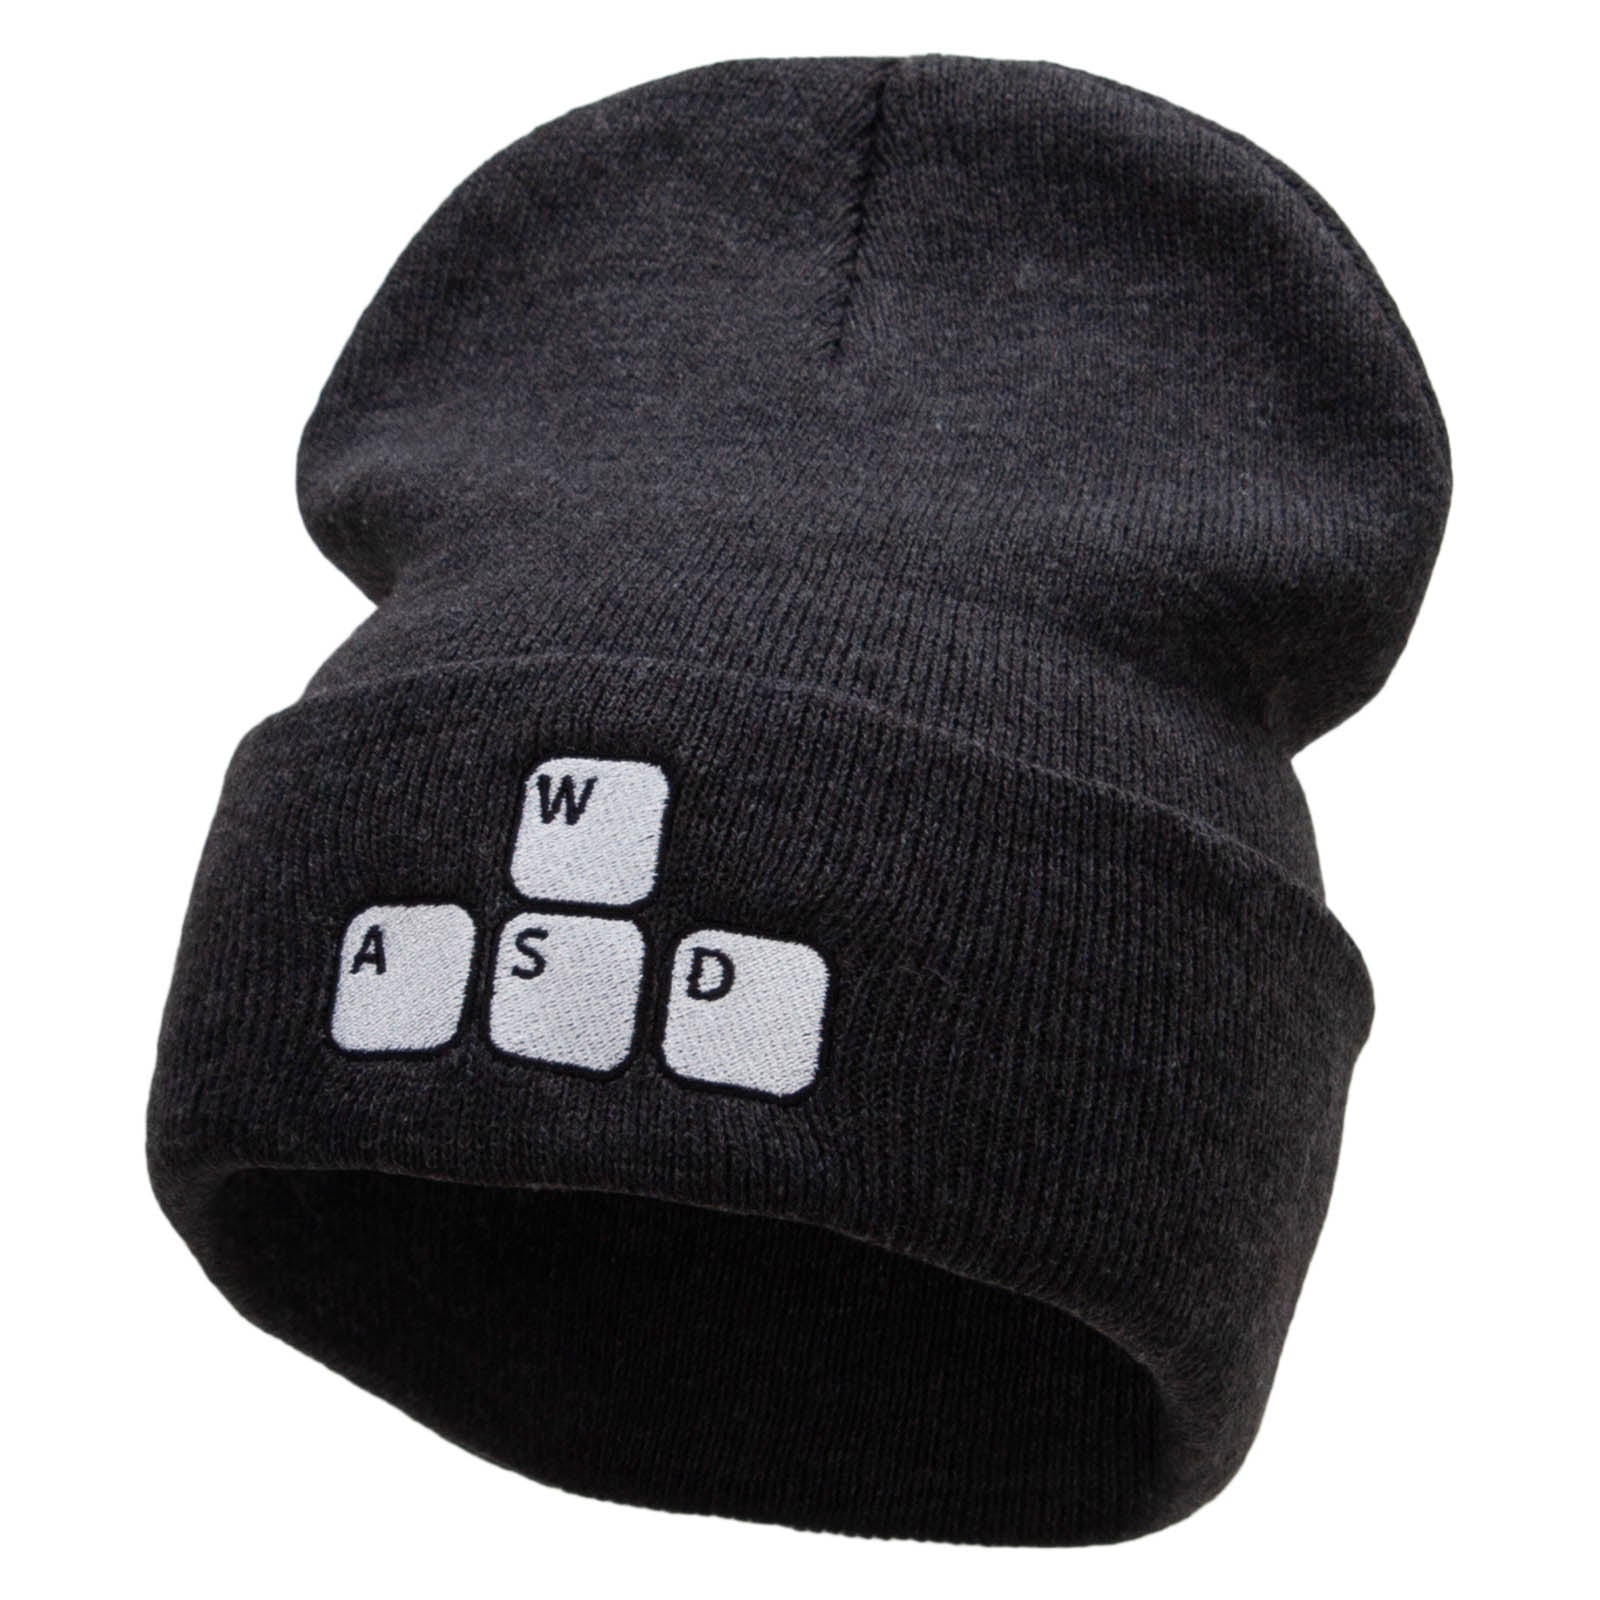 Gamer WASD Embroidered 12 Inch Long Knitted Beanie - Dk Grey OSFM